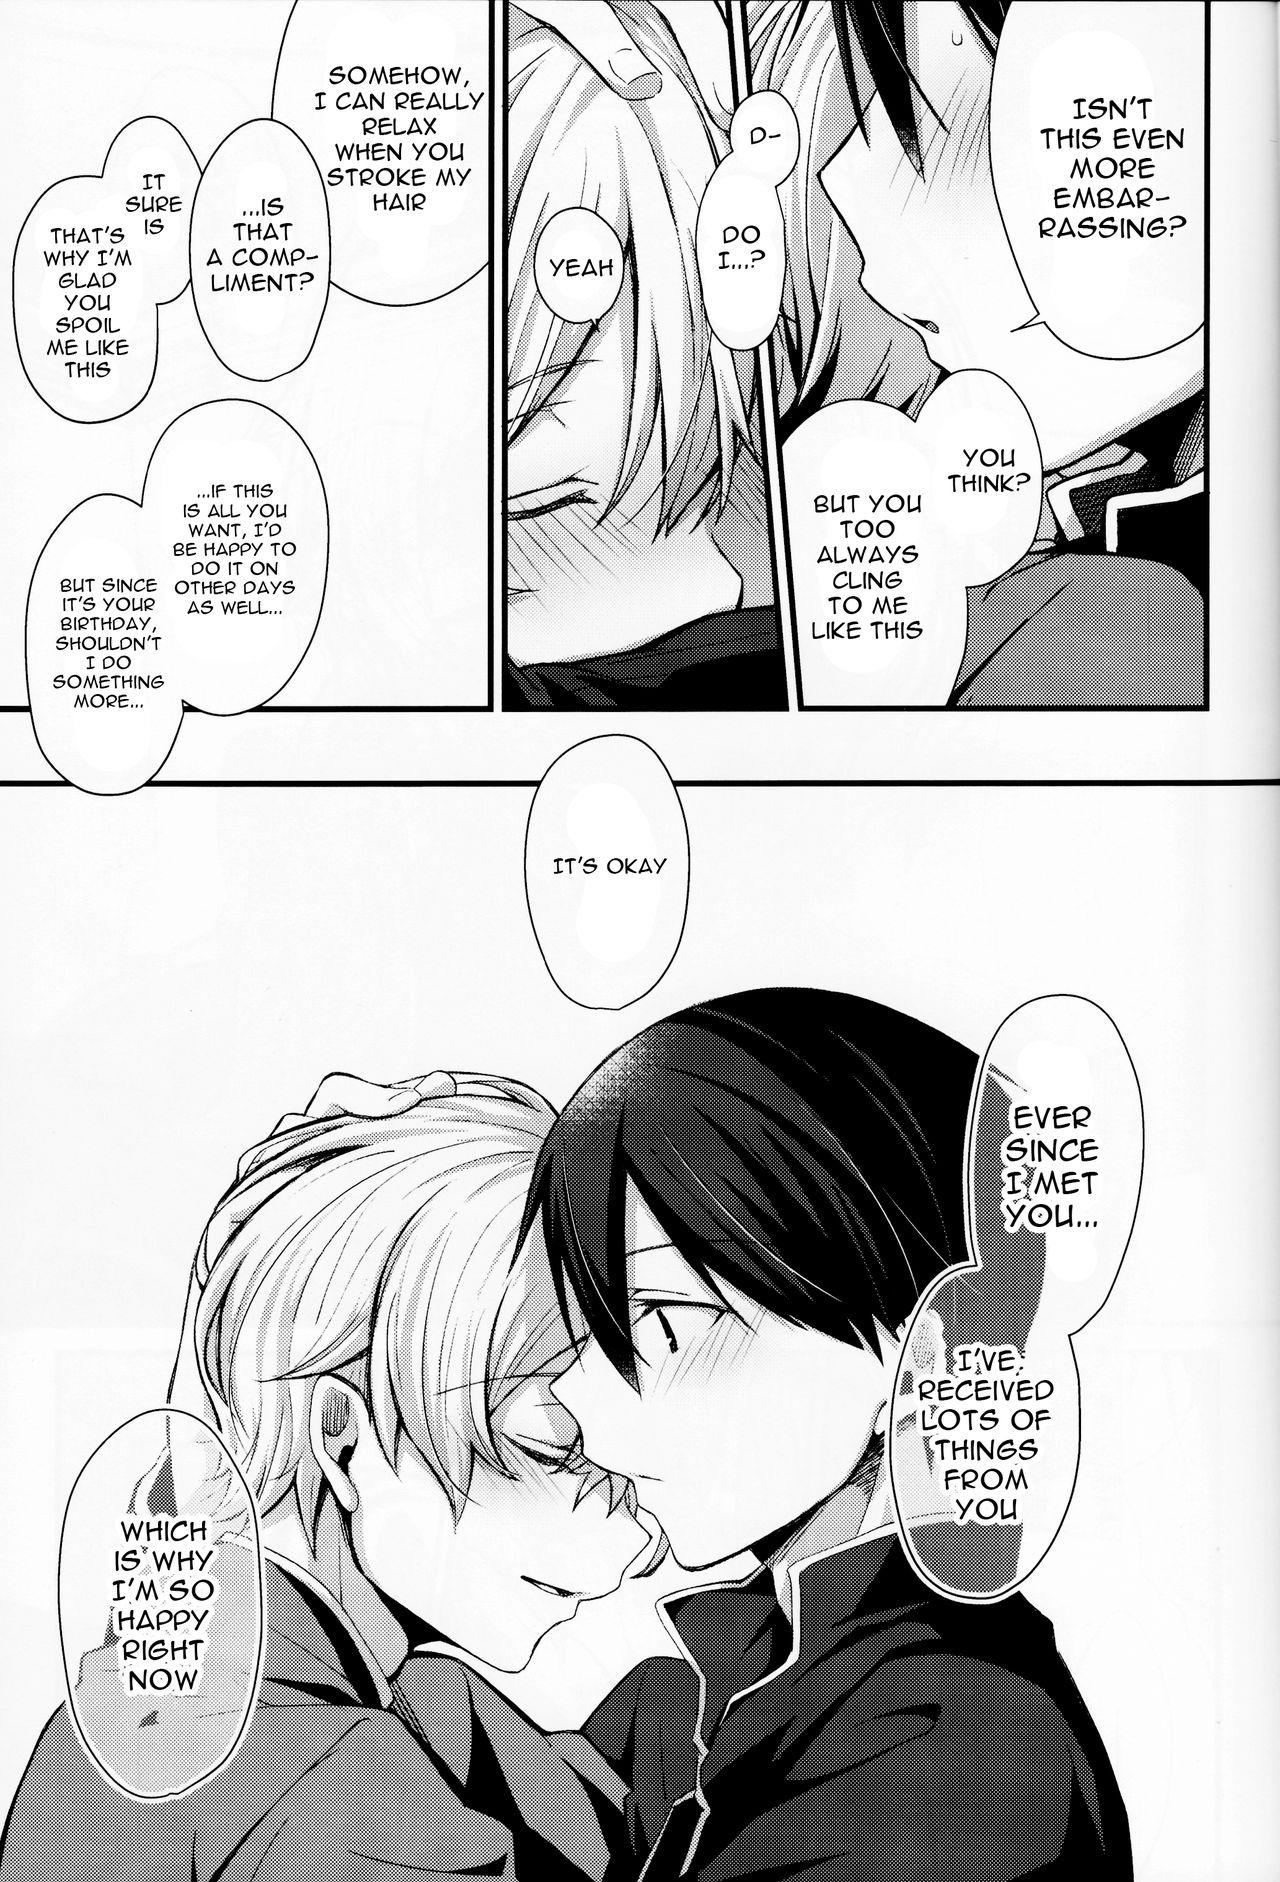 Stream All you need is... - Sword art online Amatuer Sex - Page 8